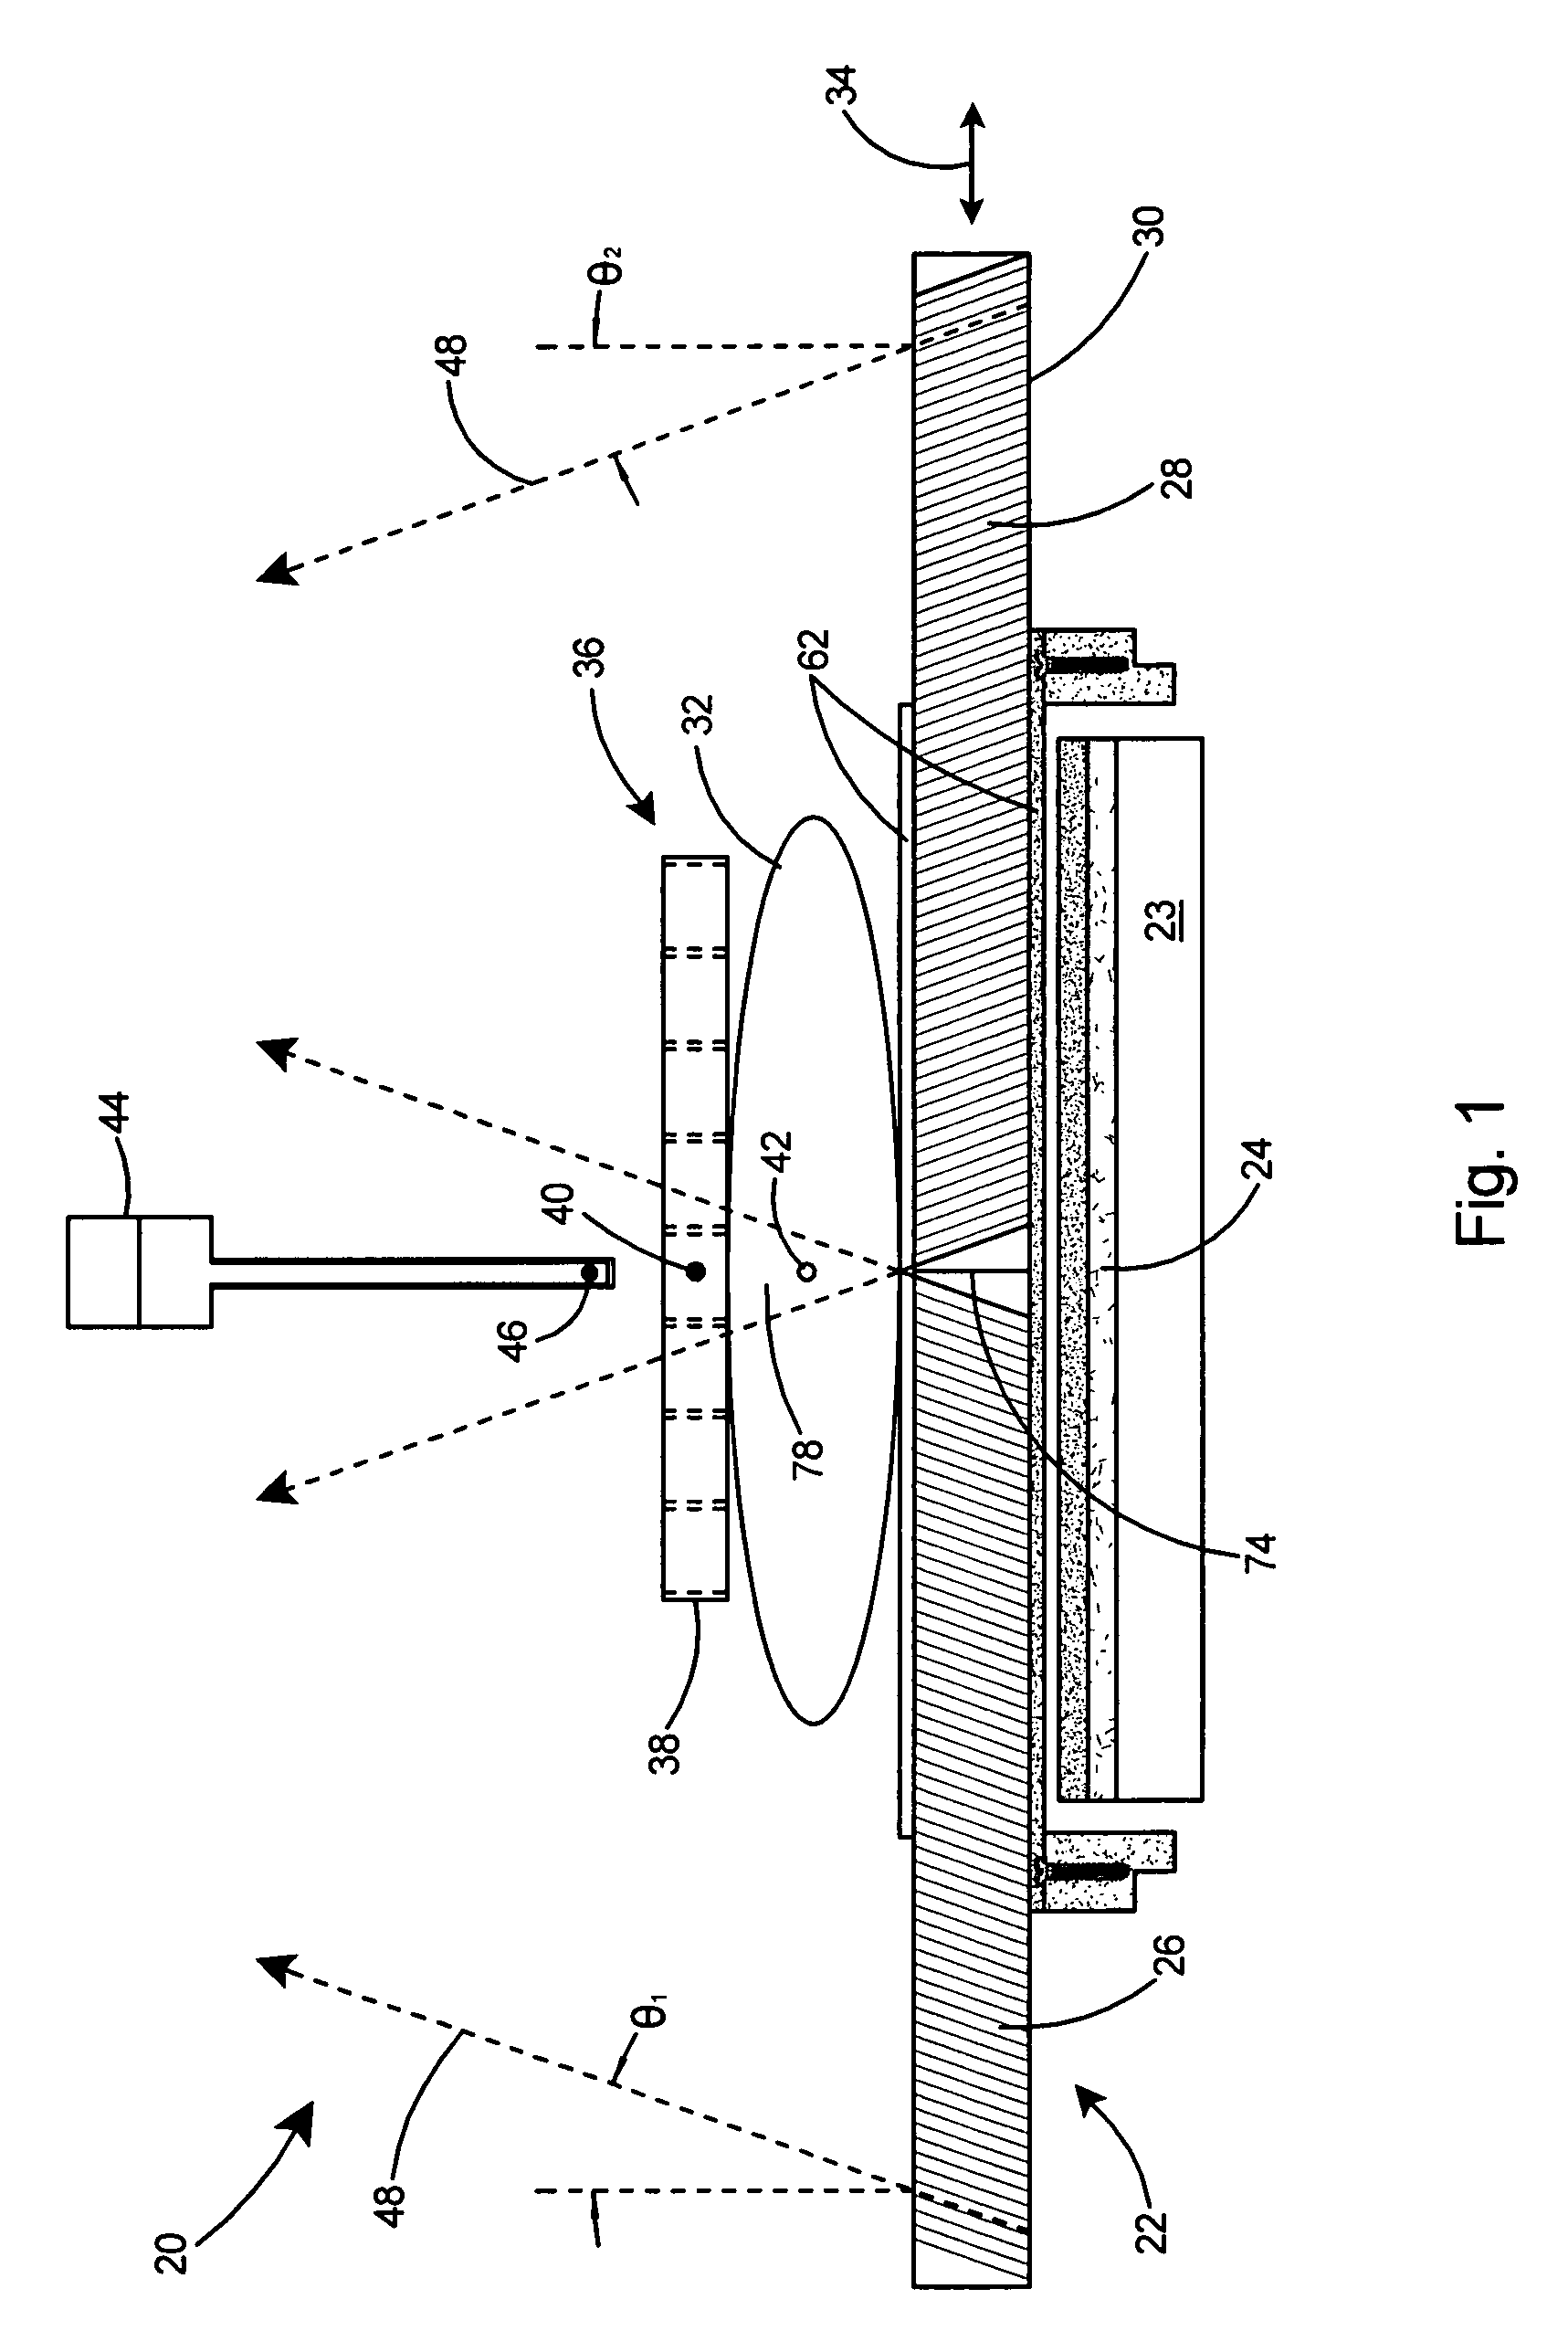 Fiducial marker and method for gamma guided stereotactic localization